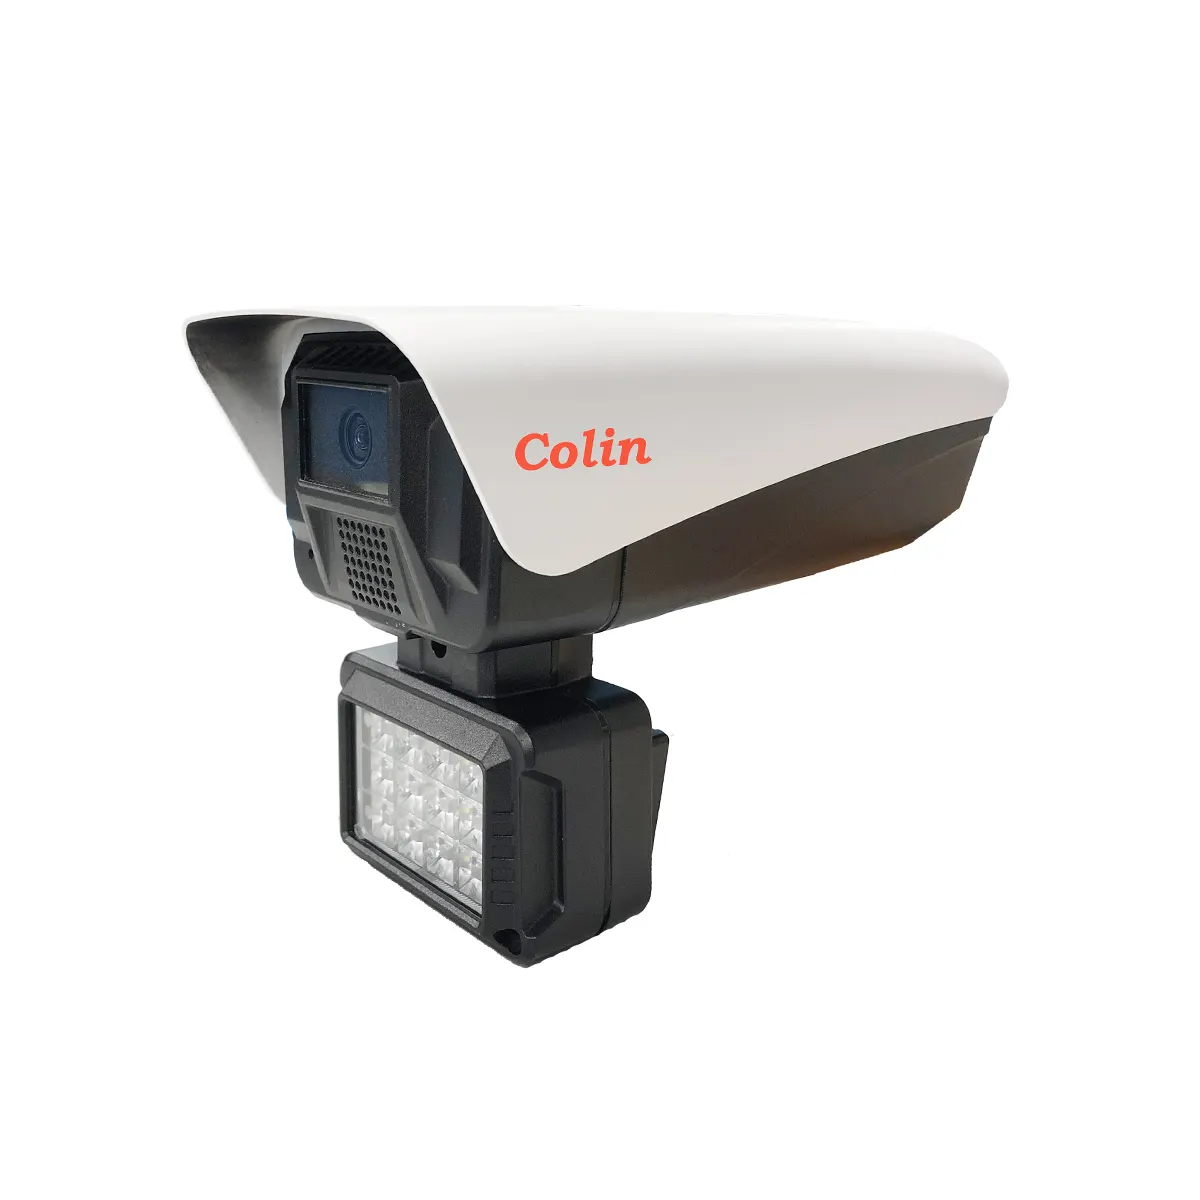 Colin Professional car license capture ANPR 5mp lpr camera with f1.0 black light lens 8mm and poe and waterproof